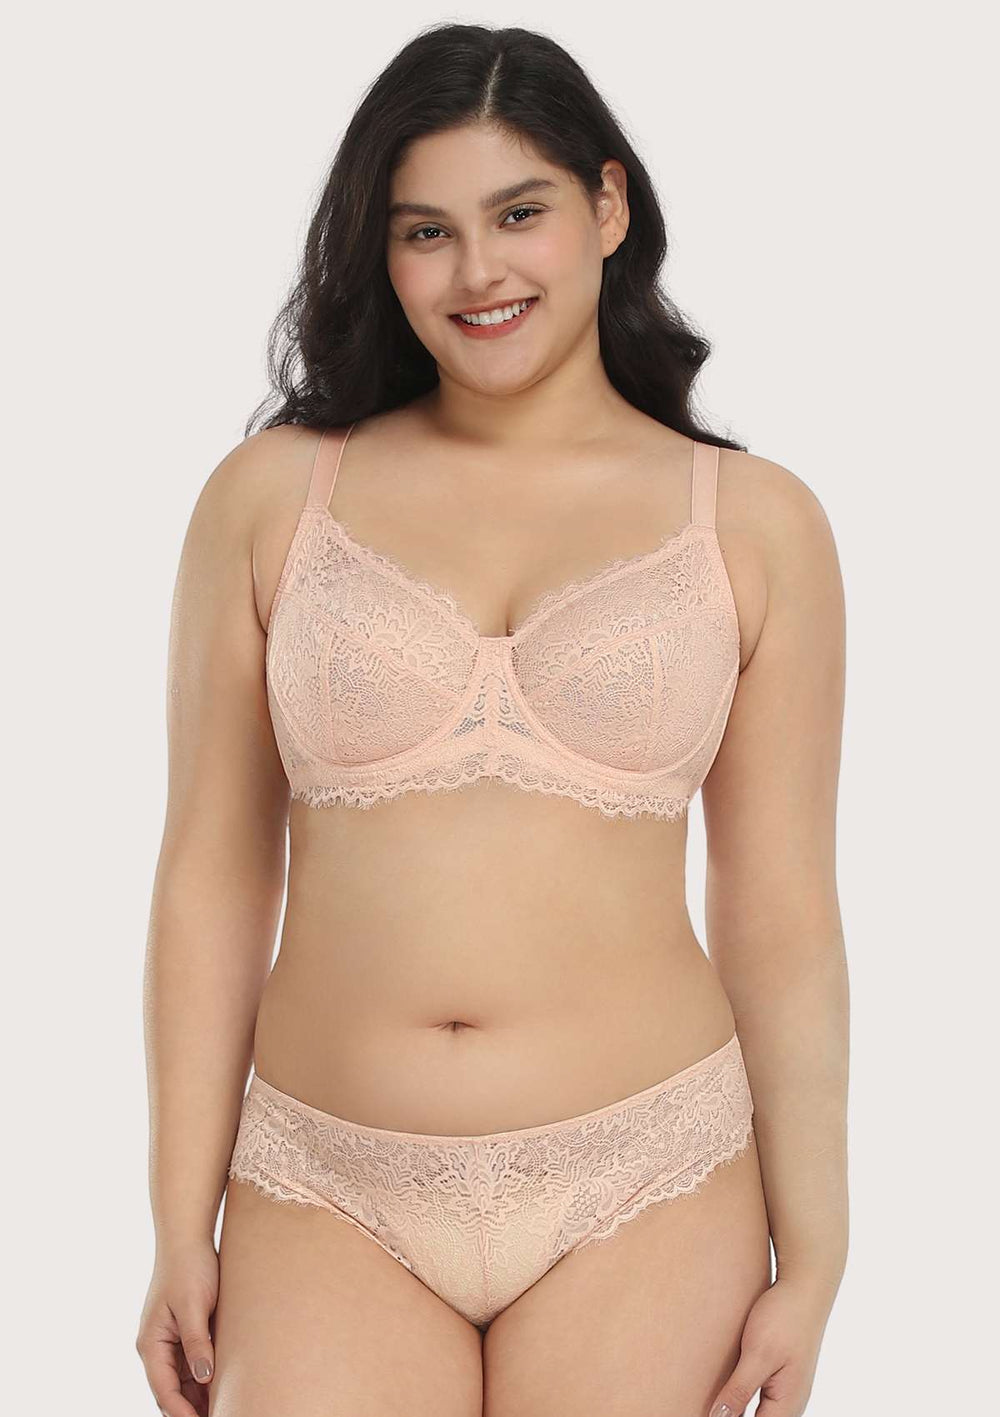 SECRET POSSESSIONS SOFT PADDED UNDERWIRED BRA & MATCHING LACY THONG SET 4  SIZES